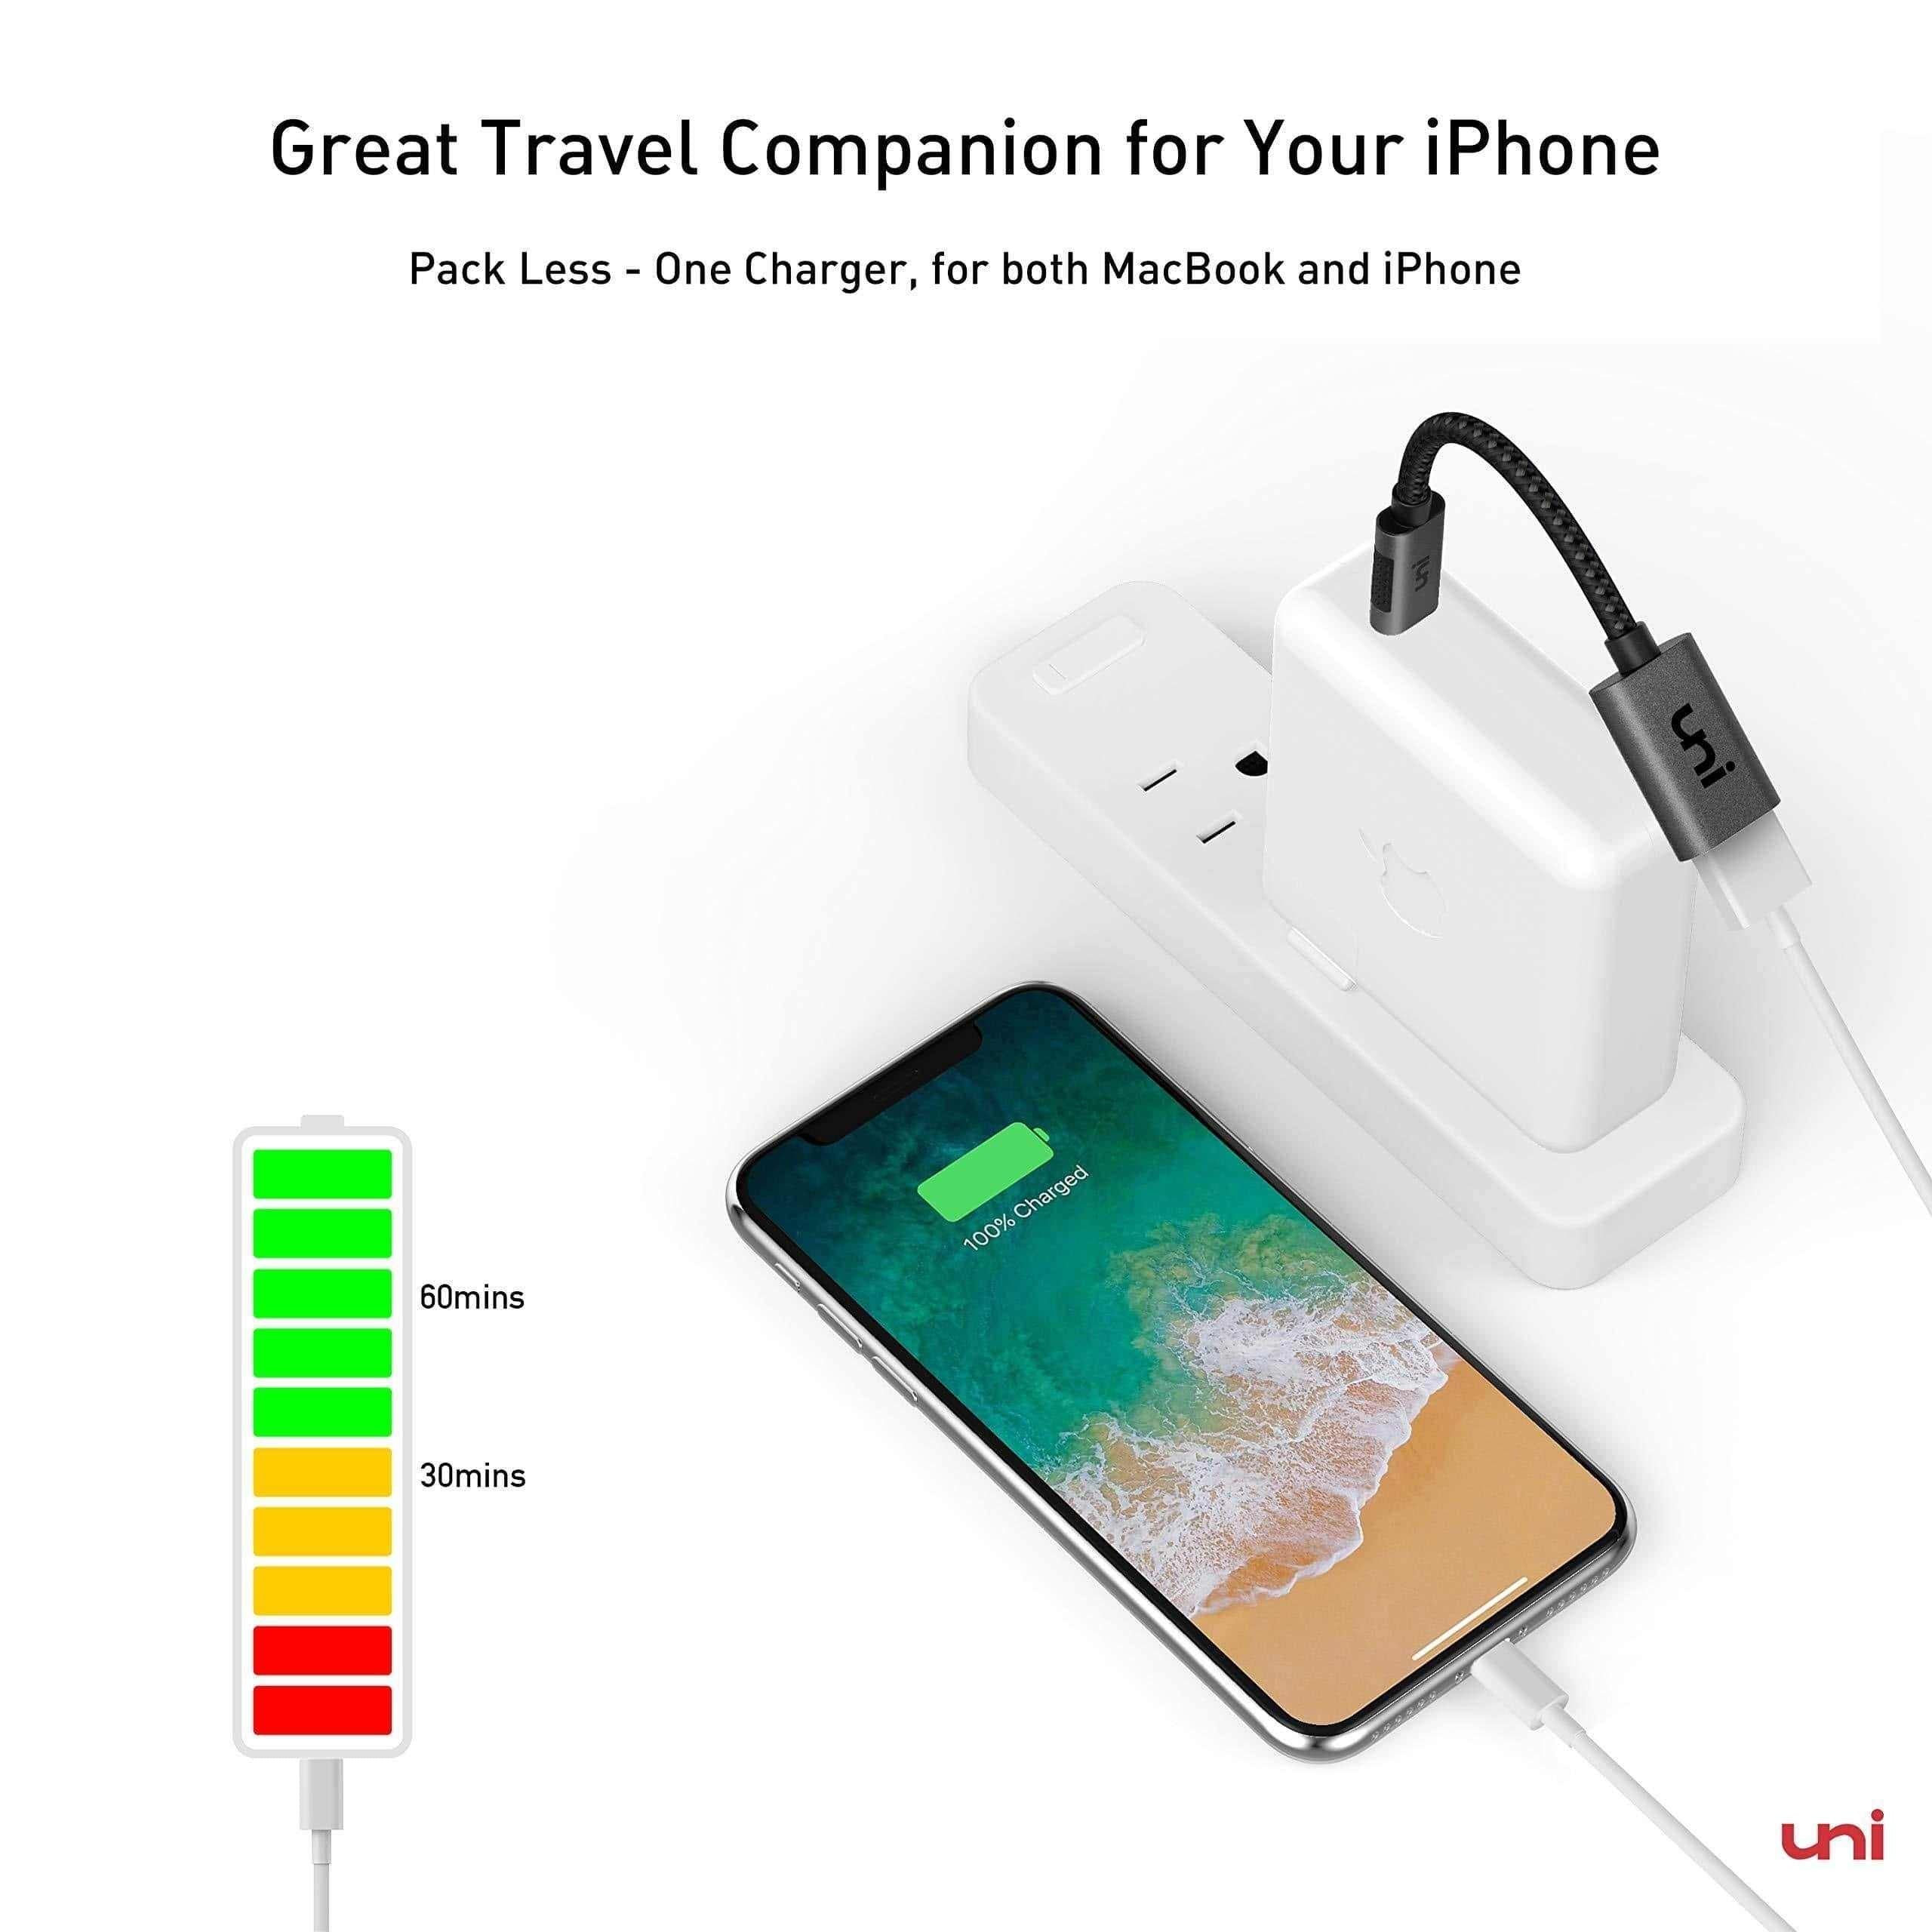 Great Travel Companion for your iPhone | uni